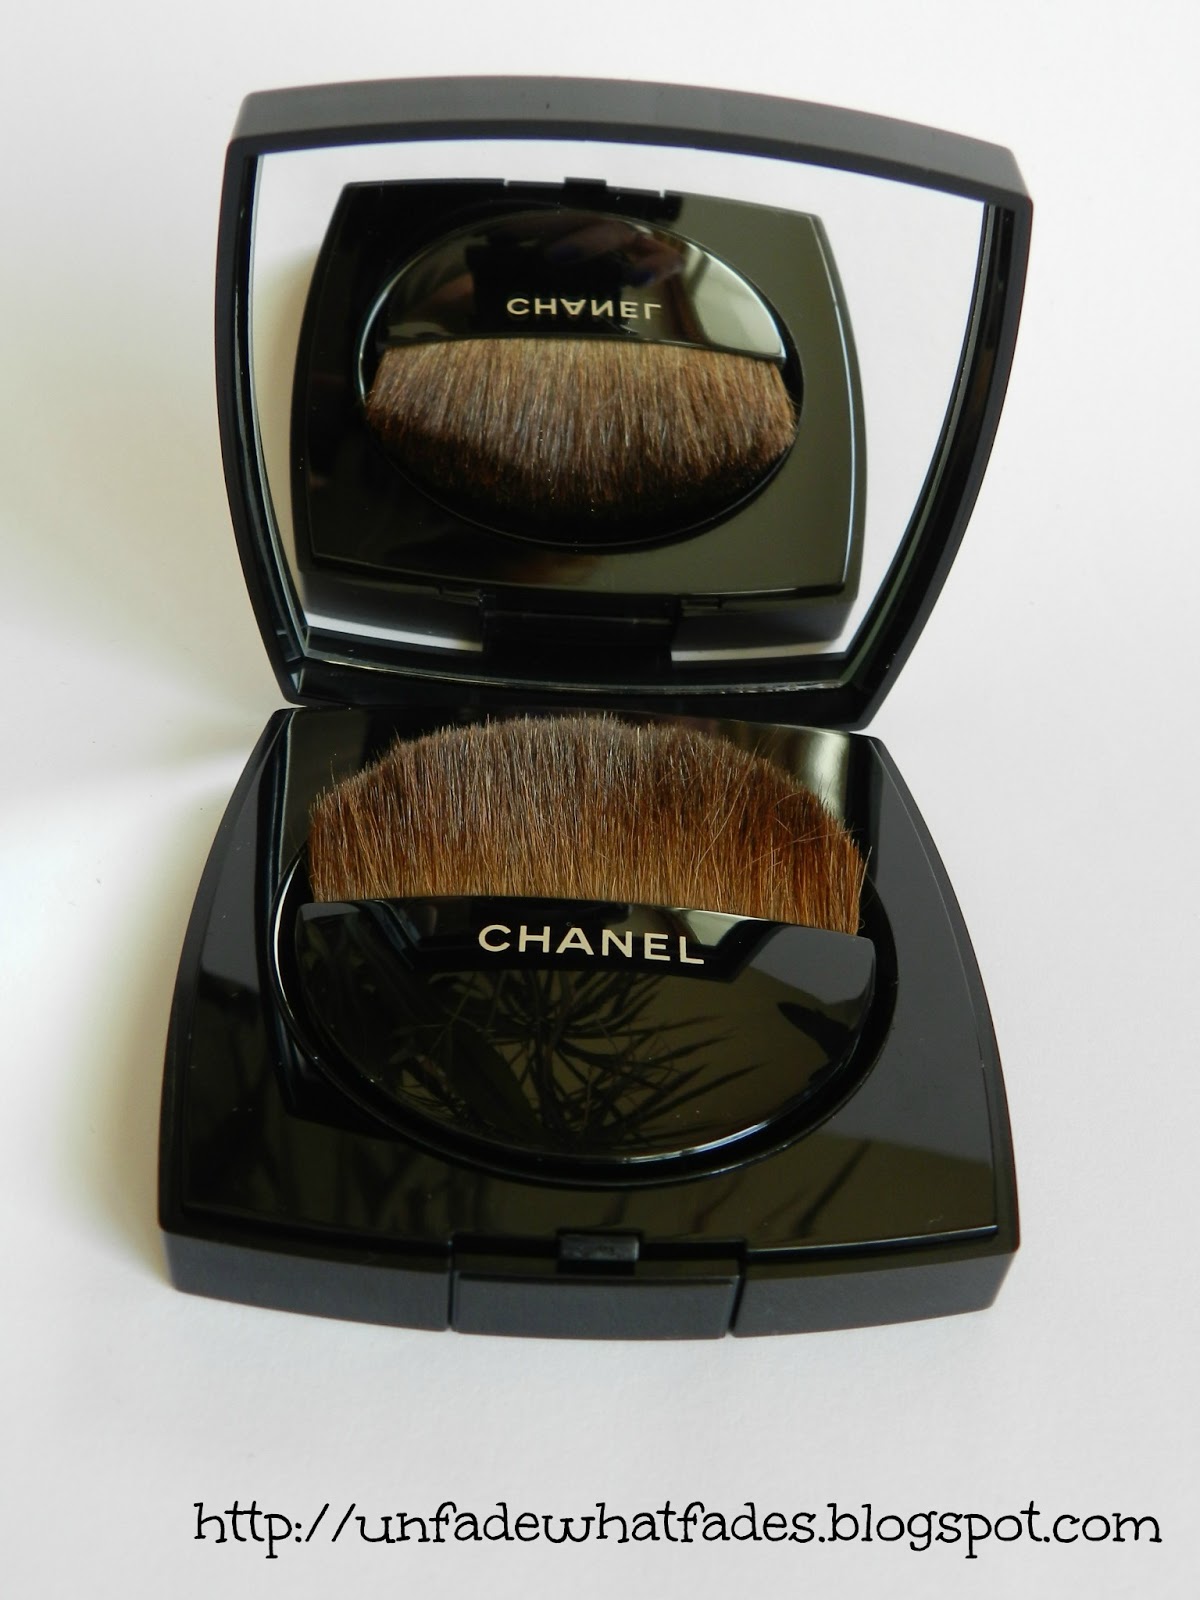 Unfade what fades: Chanel Les Beiges Healthy Glow Sheer Powder #20